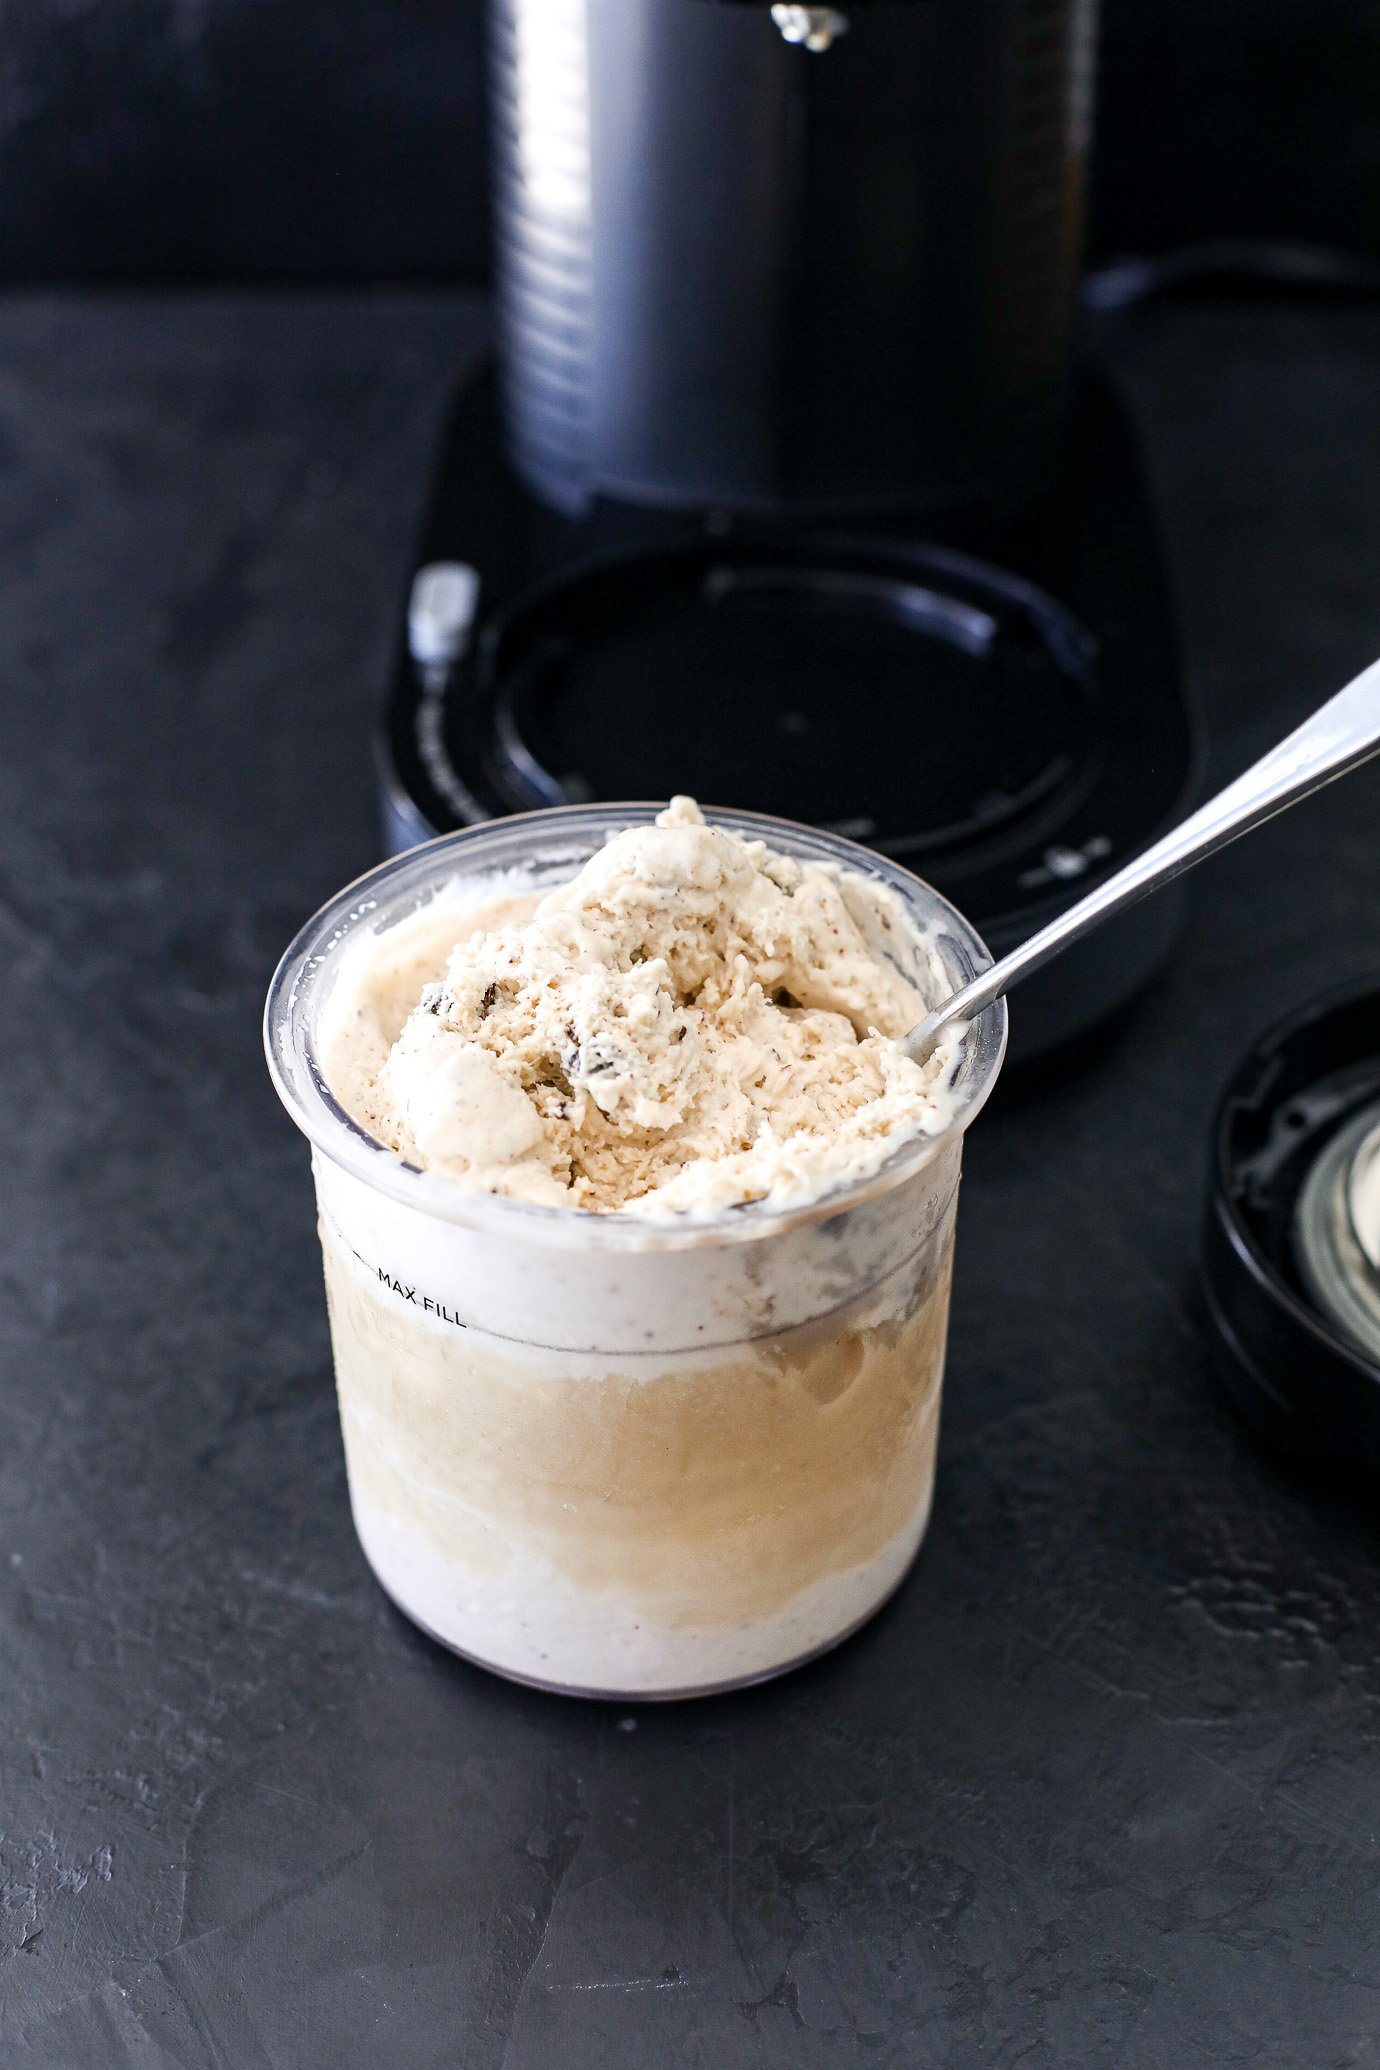 This Chunky Monkey Protein Ice Cream is blended up in the Ninja CREAMi and is so creamy and delicious!